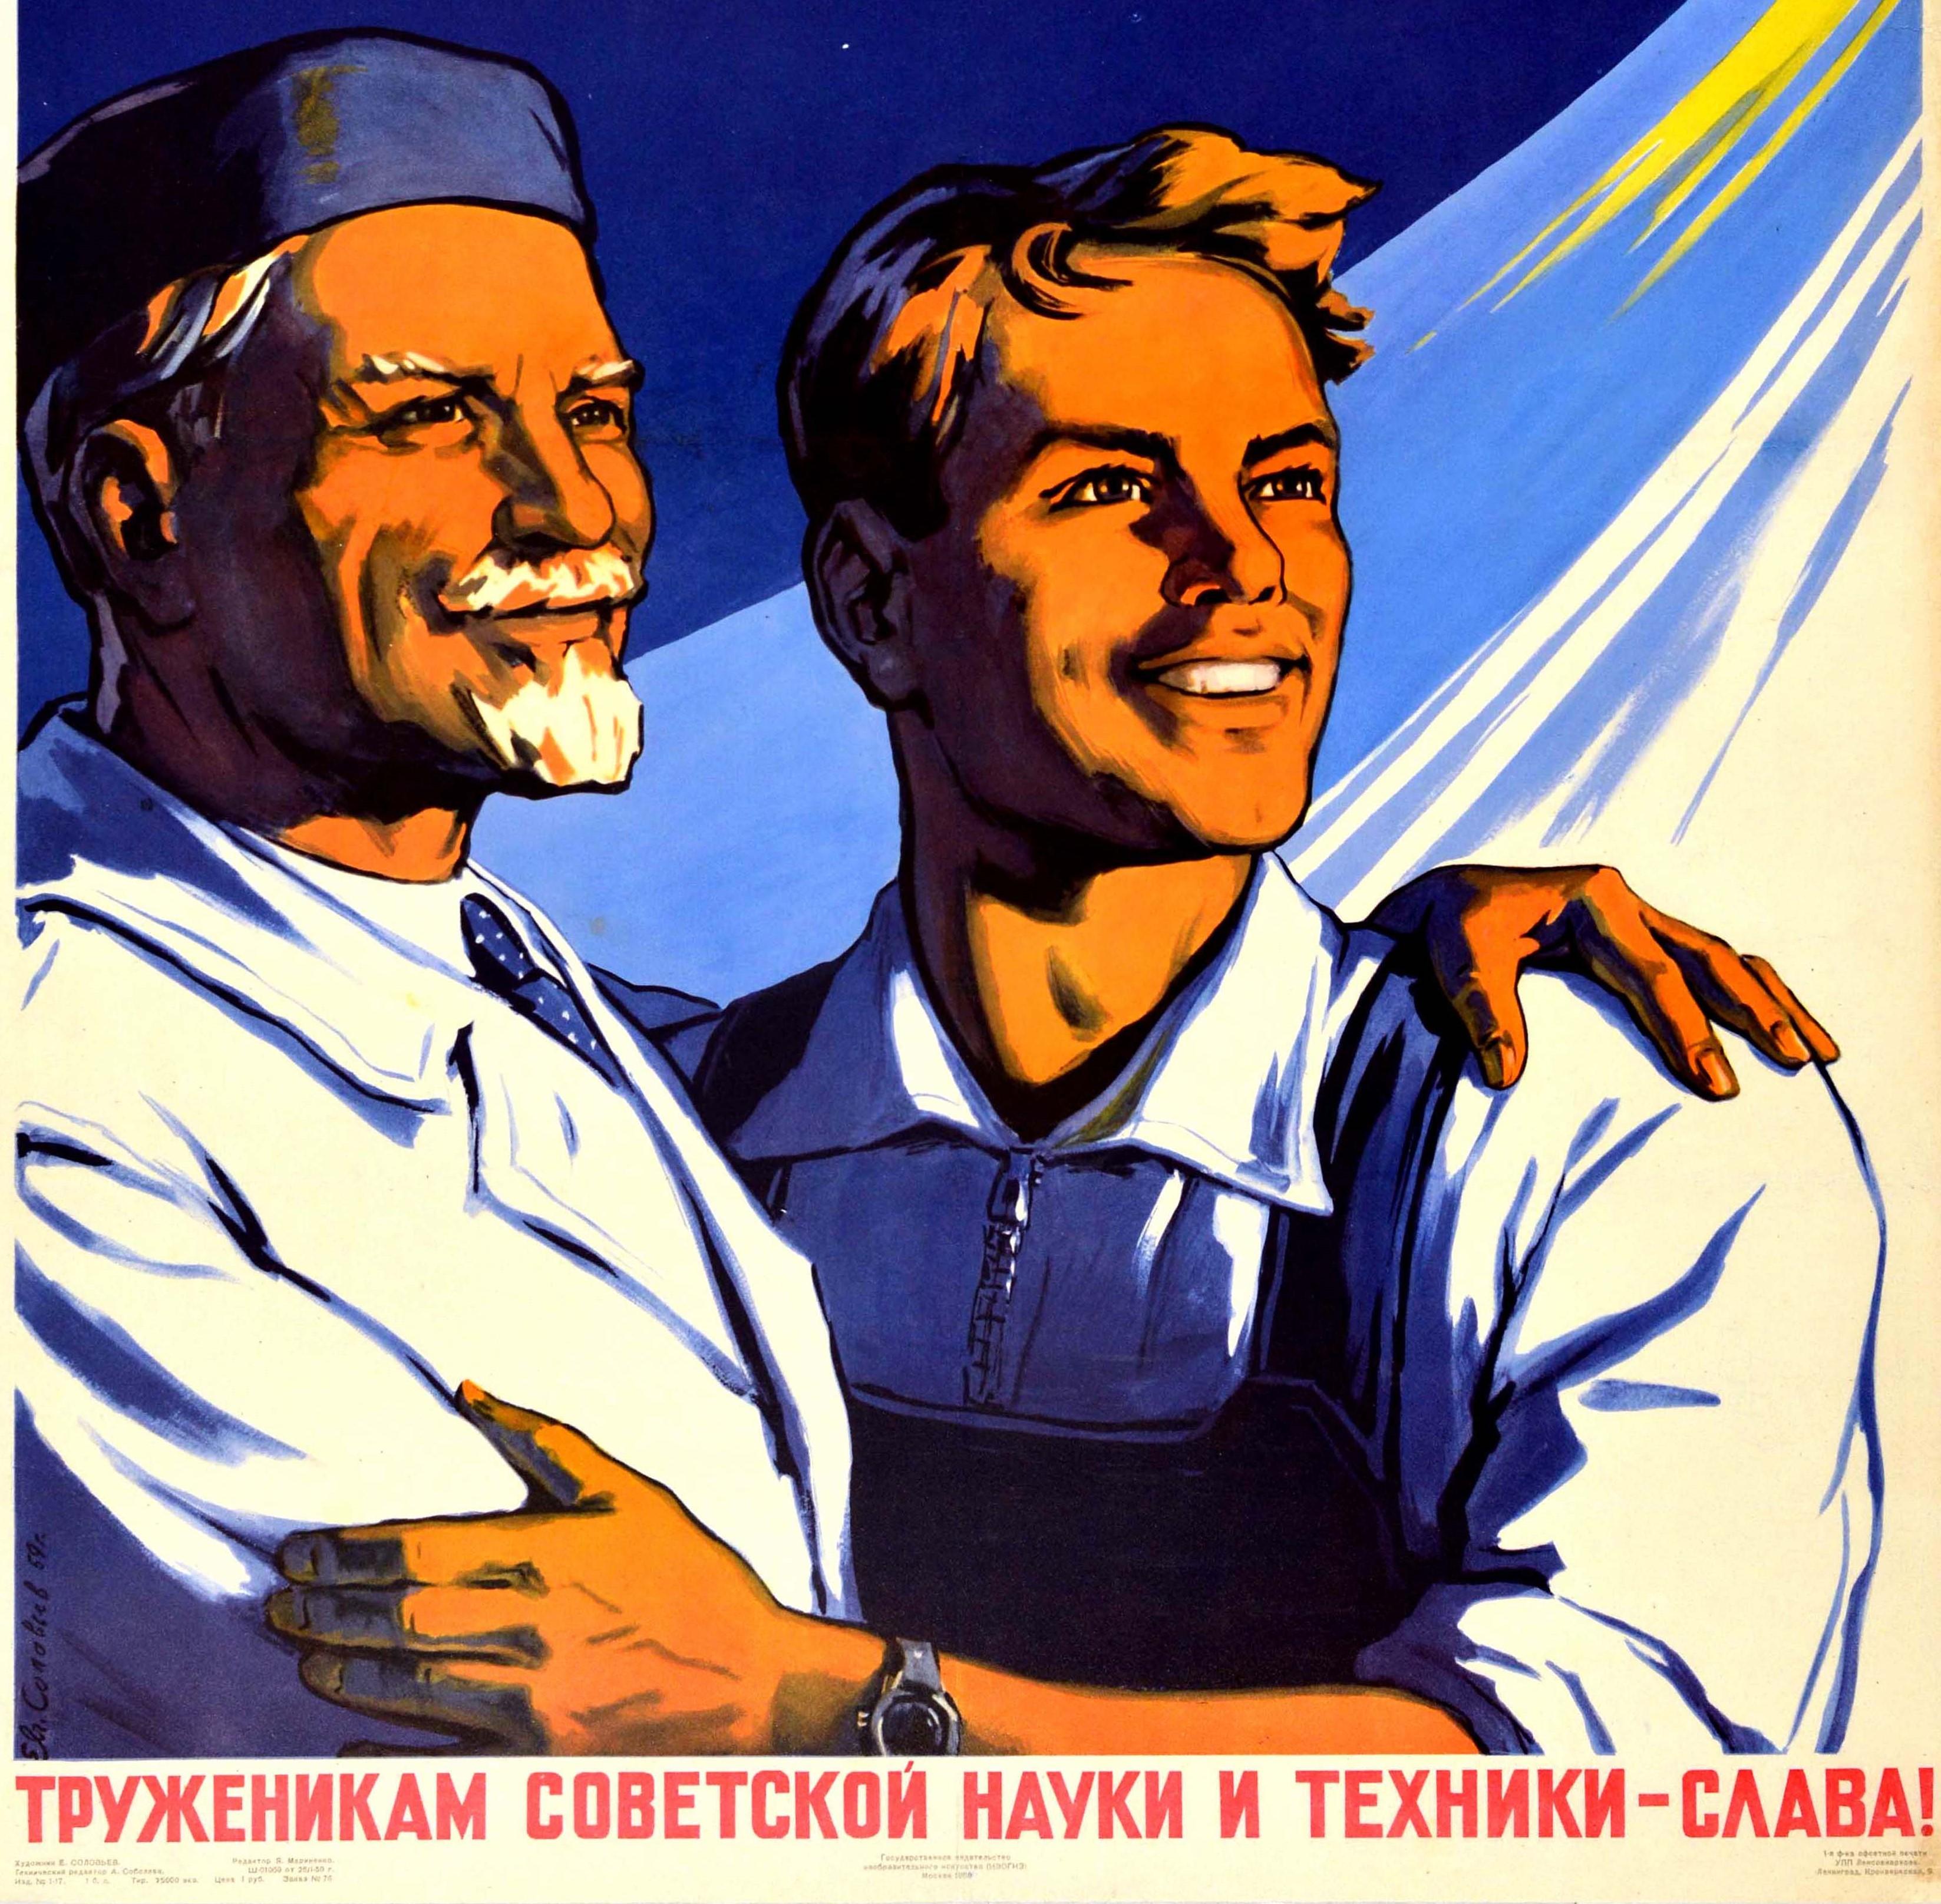 Original vintage Soviet propaganda poster - Glory to the Workers of Soviet Science and Technology! - featuring a great image of an engineer and a scientist with their arms around each other and smiling in front of a red CCCP / USSR rocket shooting